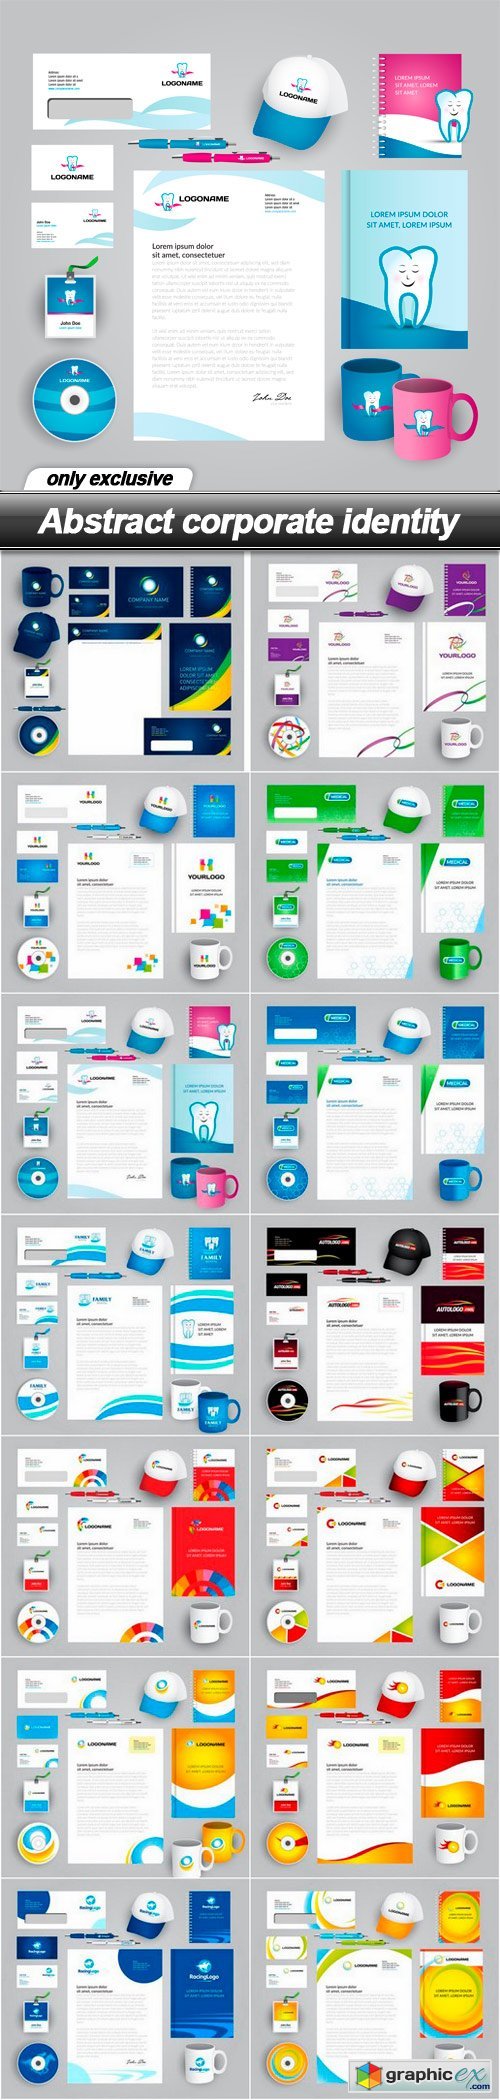 Abstract corporate identity - 14 EPS